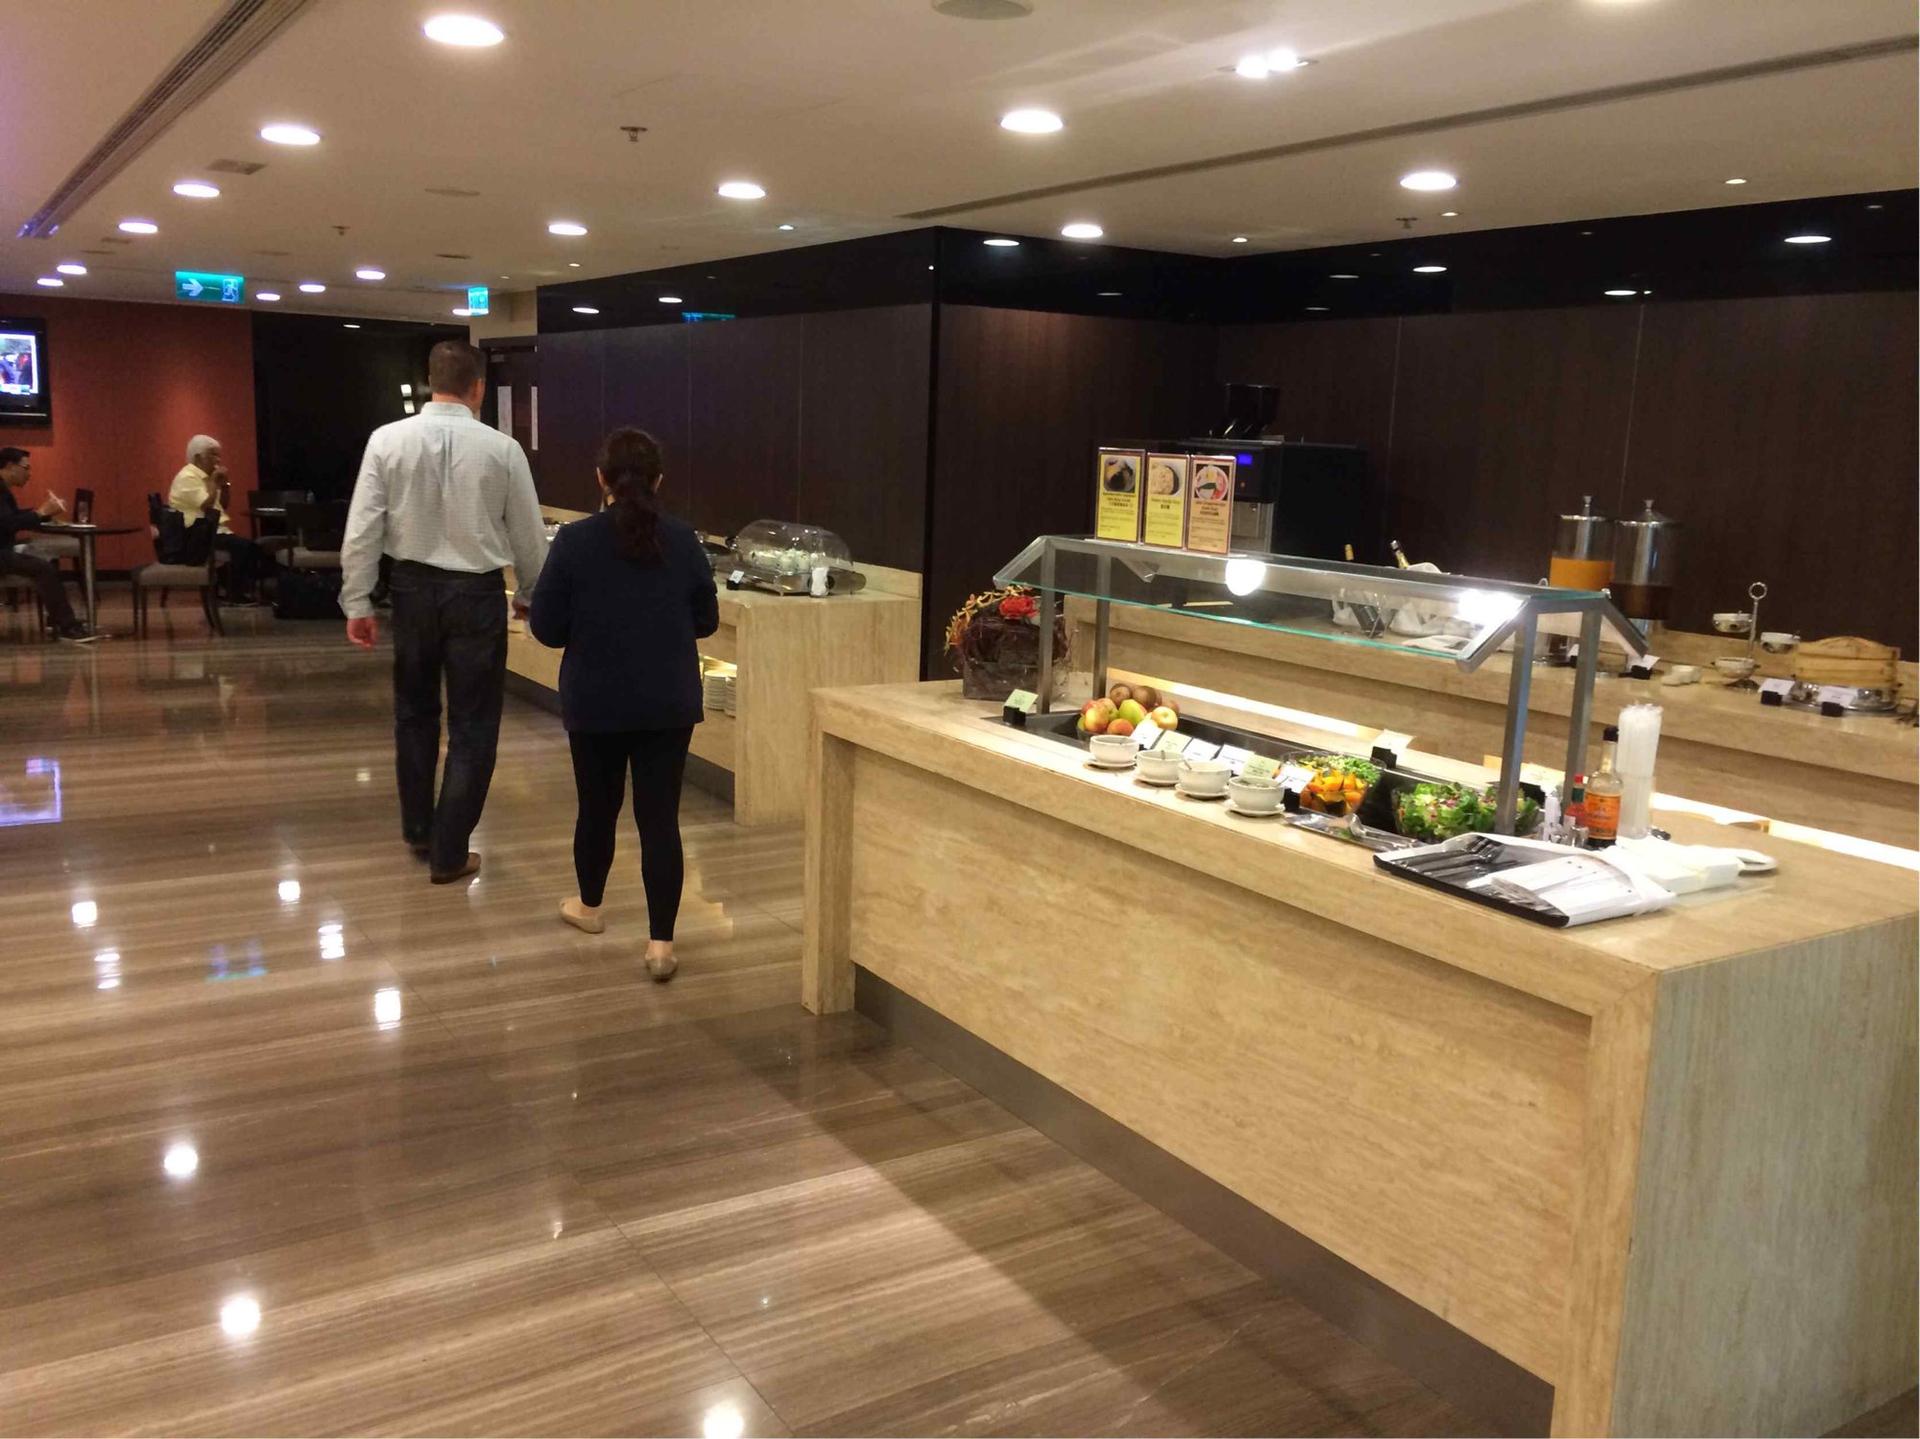 Singapore Airlines SilverKris Business Class Lounge image 2 of 68